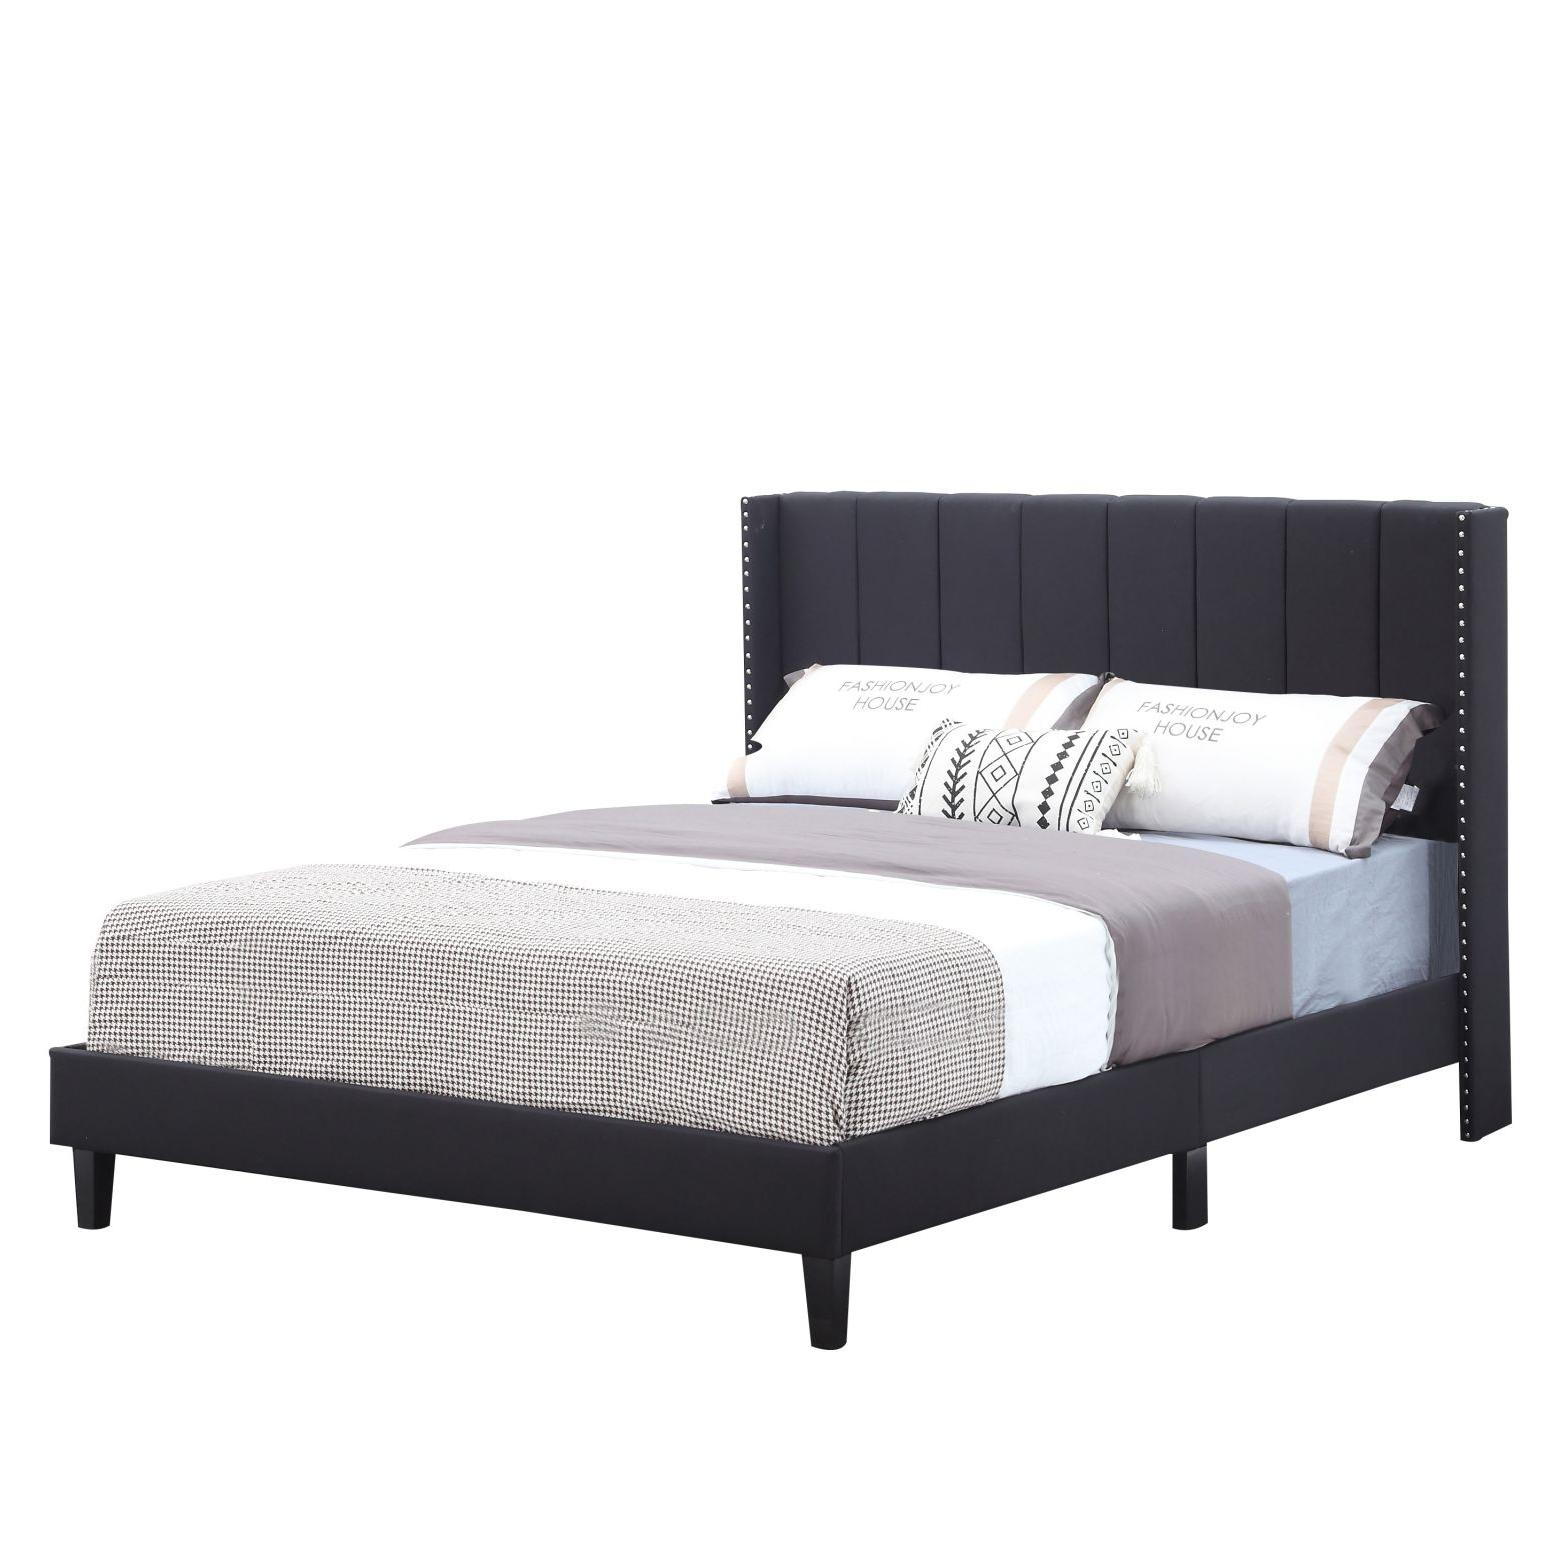 GZMR GZMR Frame Black Queen Bed Frame in the at Lowes.com